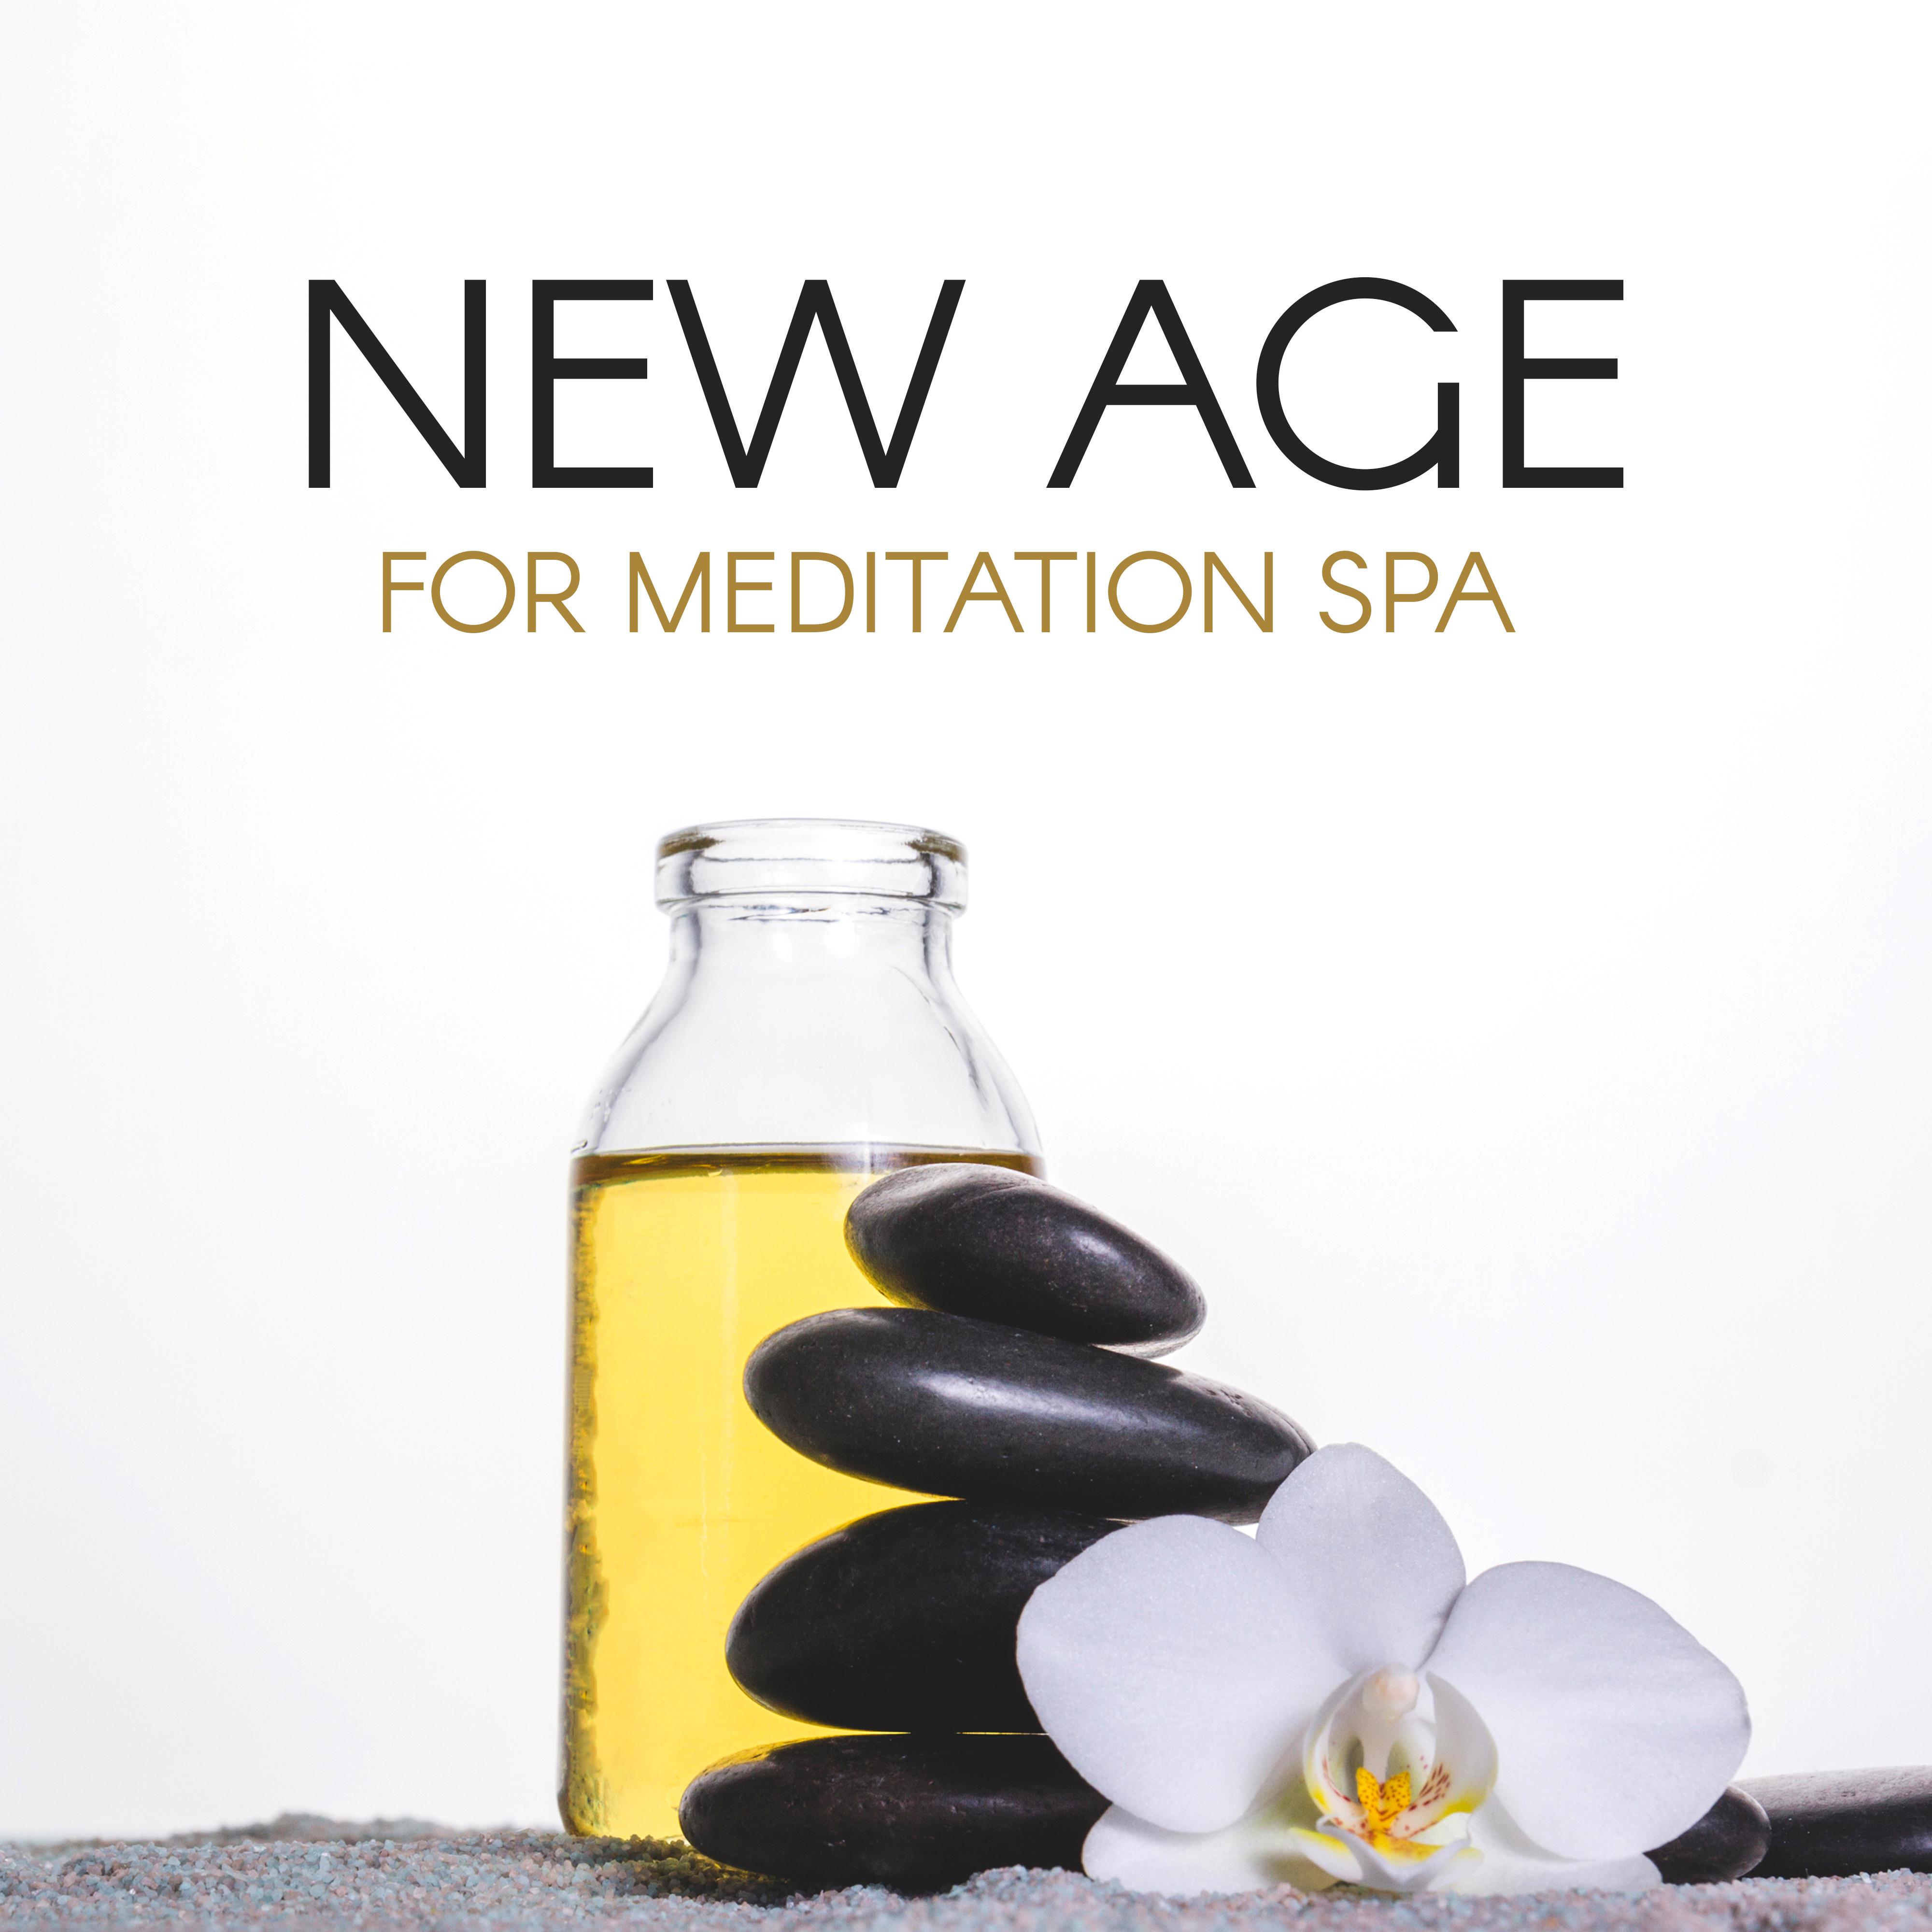 New Age for Meditation Spa